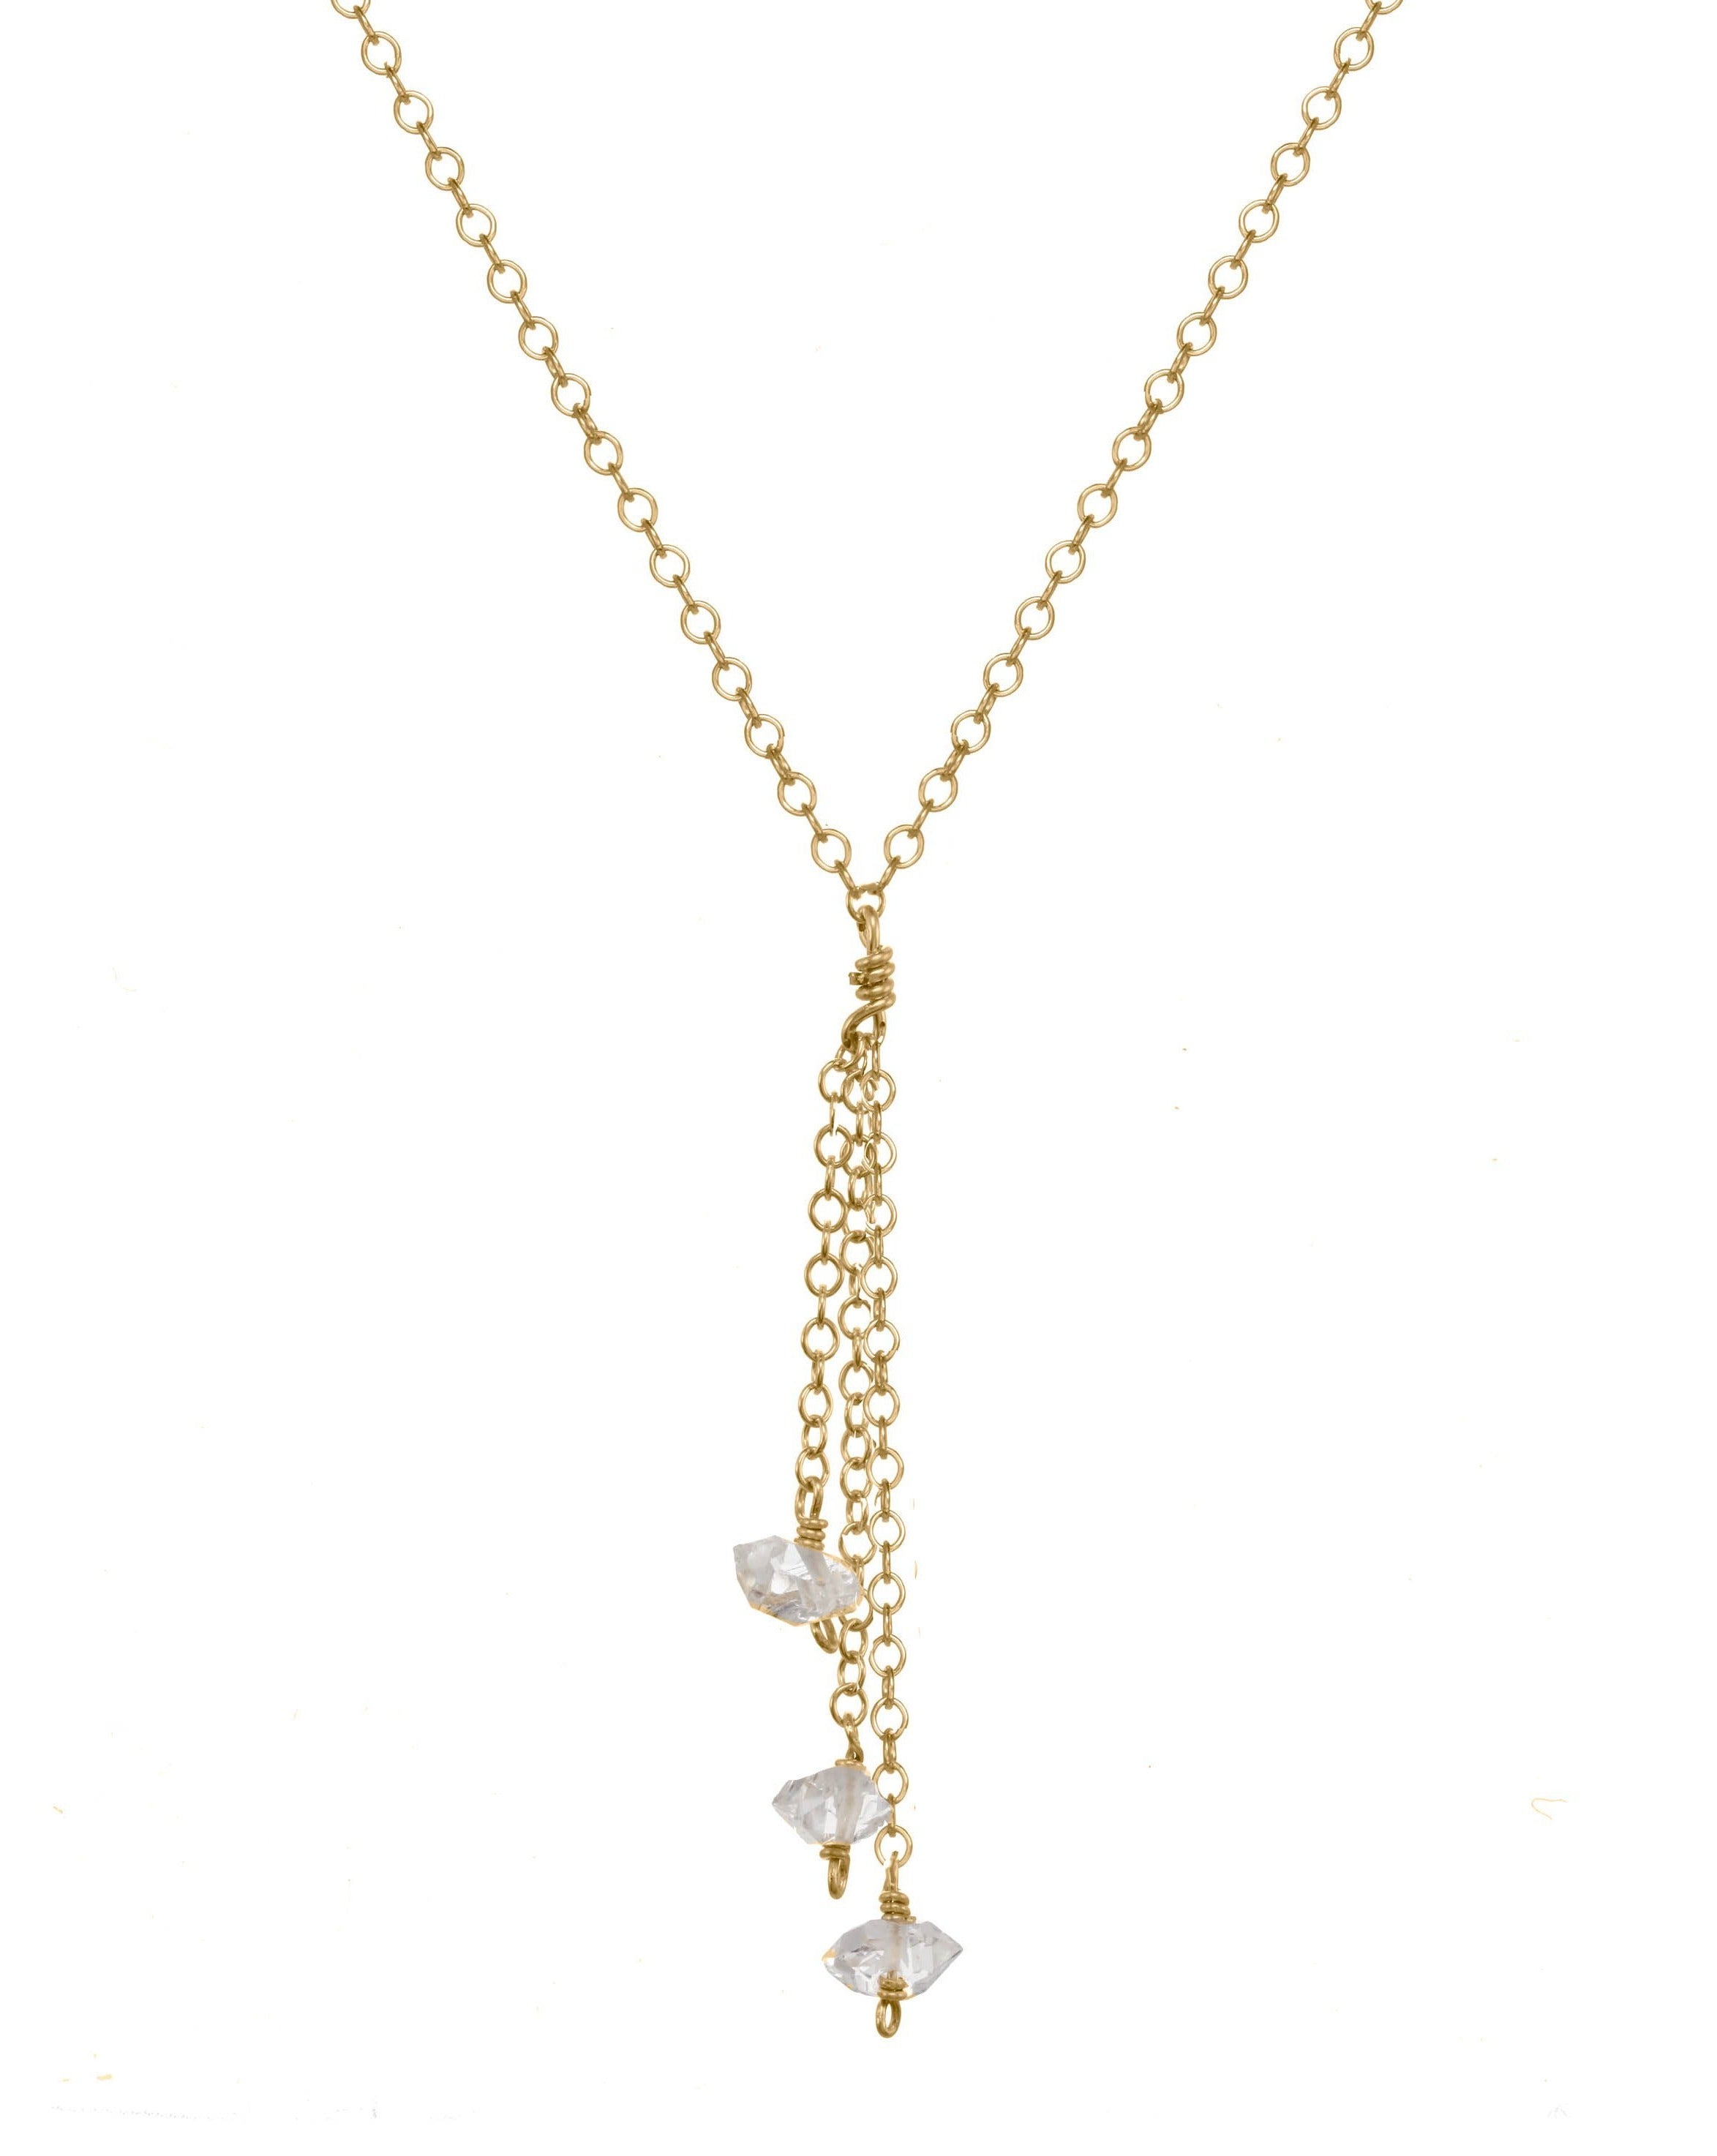 Miren Herkimer Necklace by KOZAKH. A 16 to 18 inch adjustable length, 2 inches drop lariat style necklace, crafted in 14K Gold Filled, featuring Herkimer Diamonds.